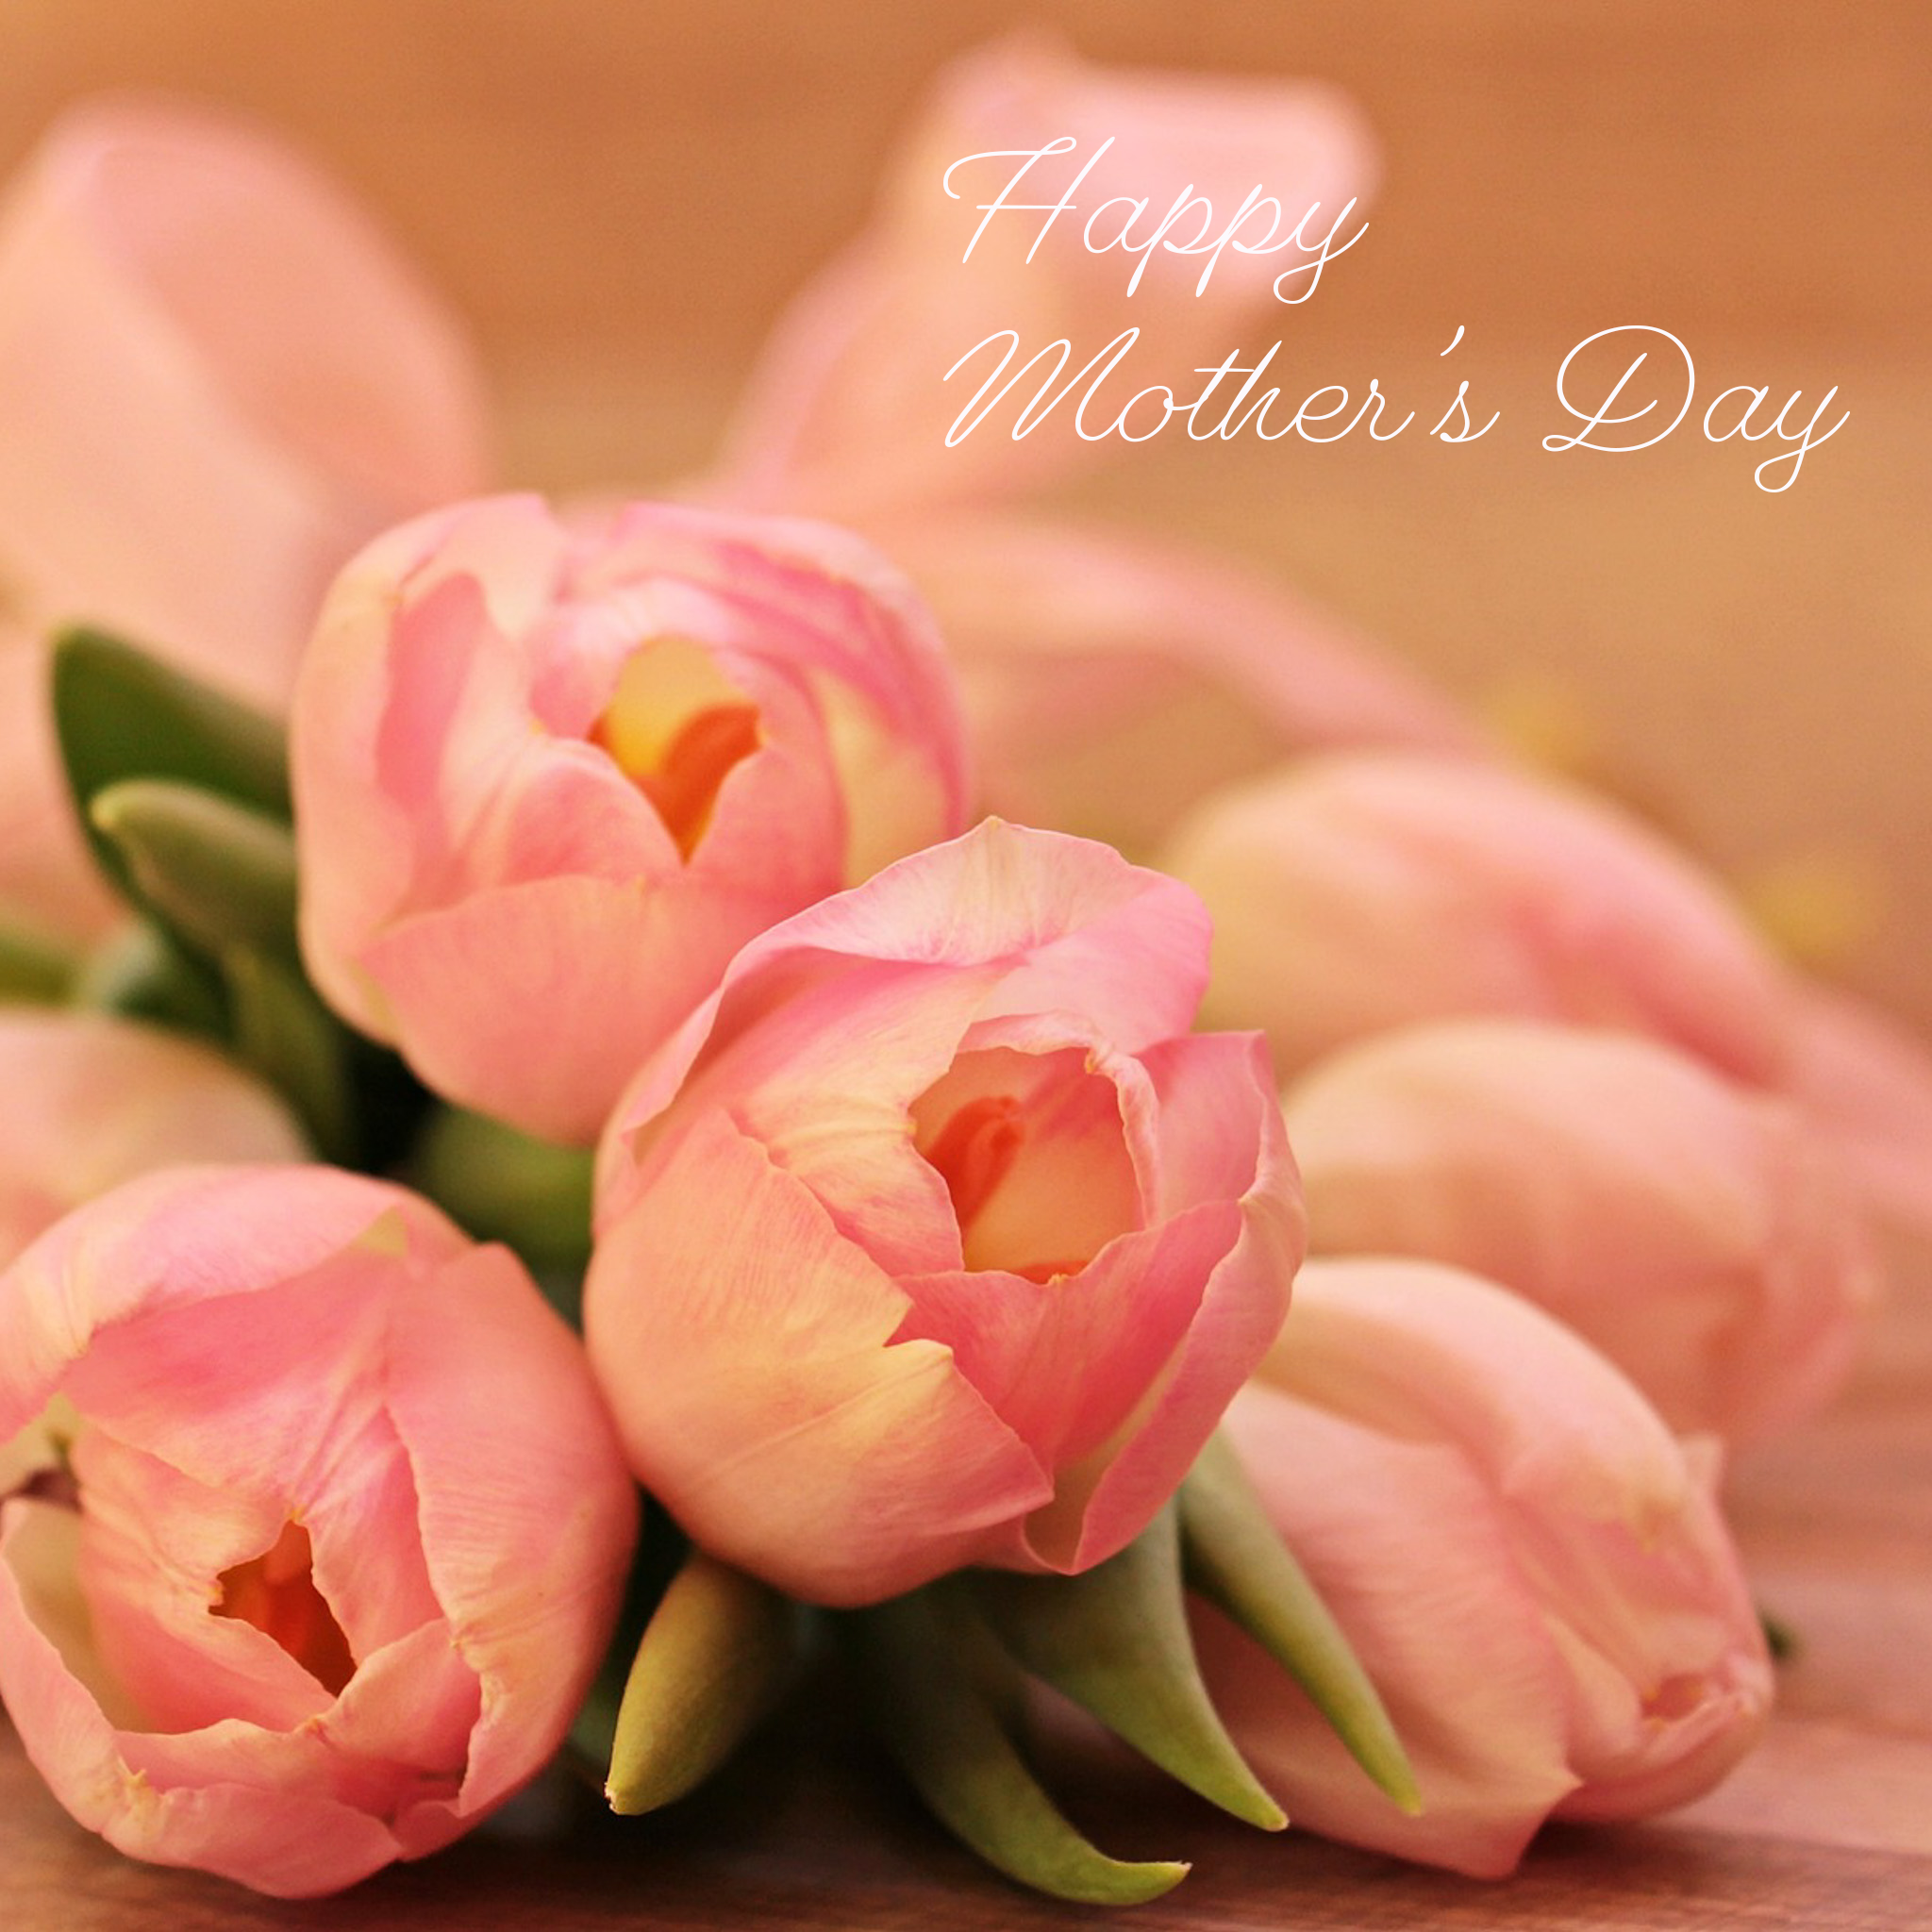 happy-mothers-day-gbb7acec4d_1920-2.png